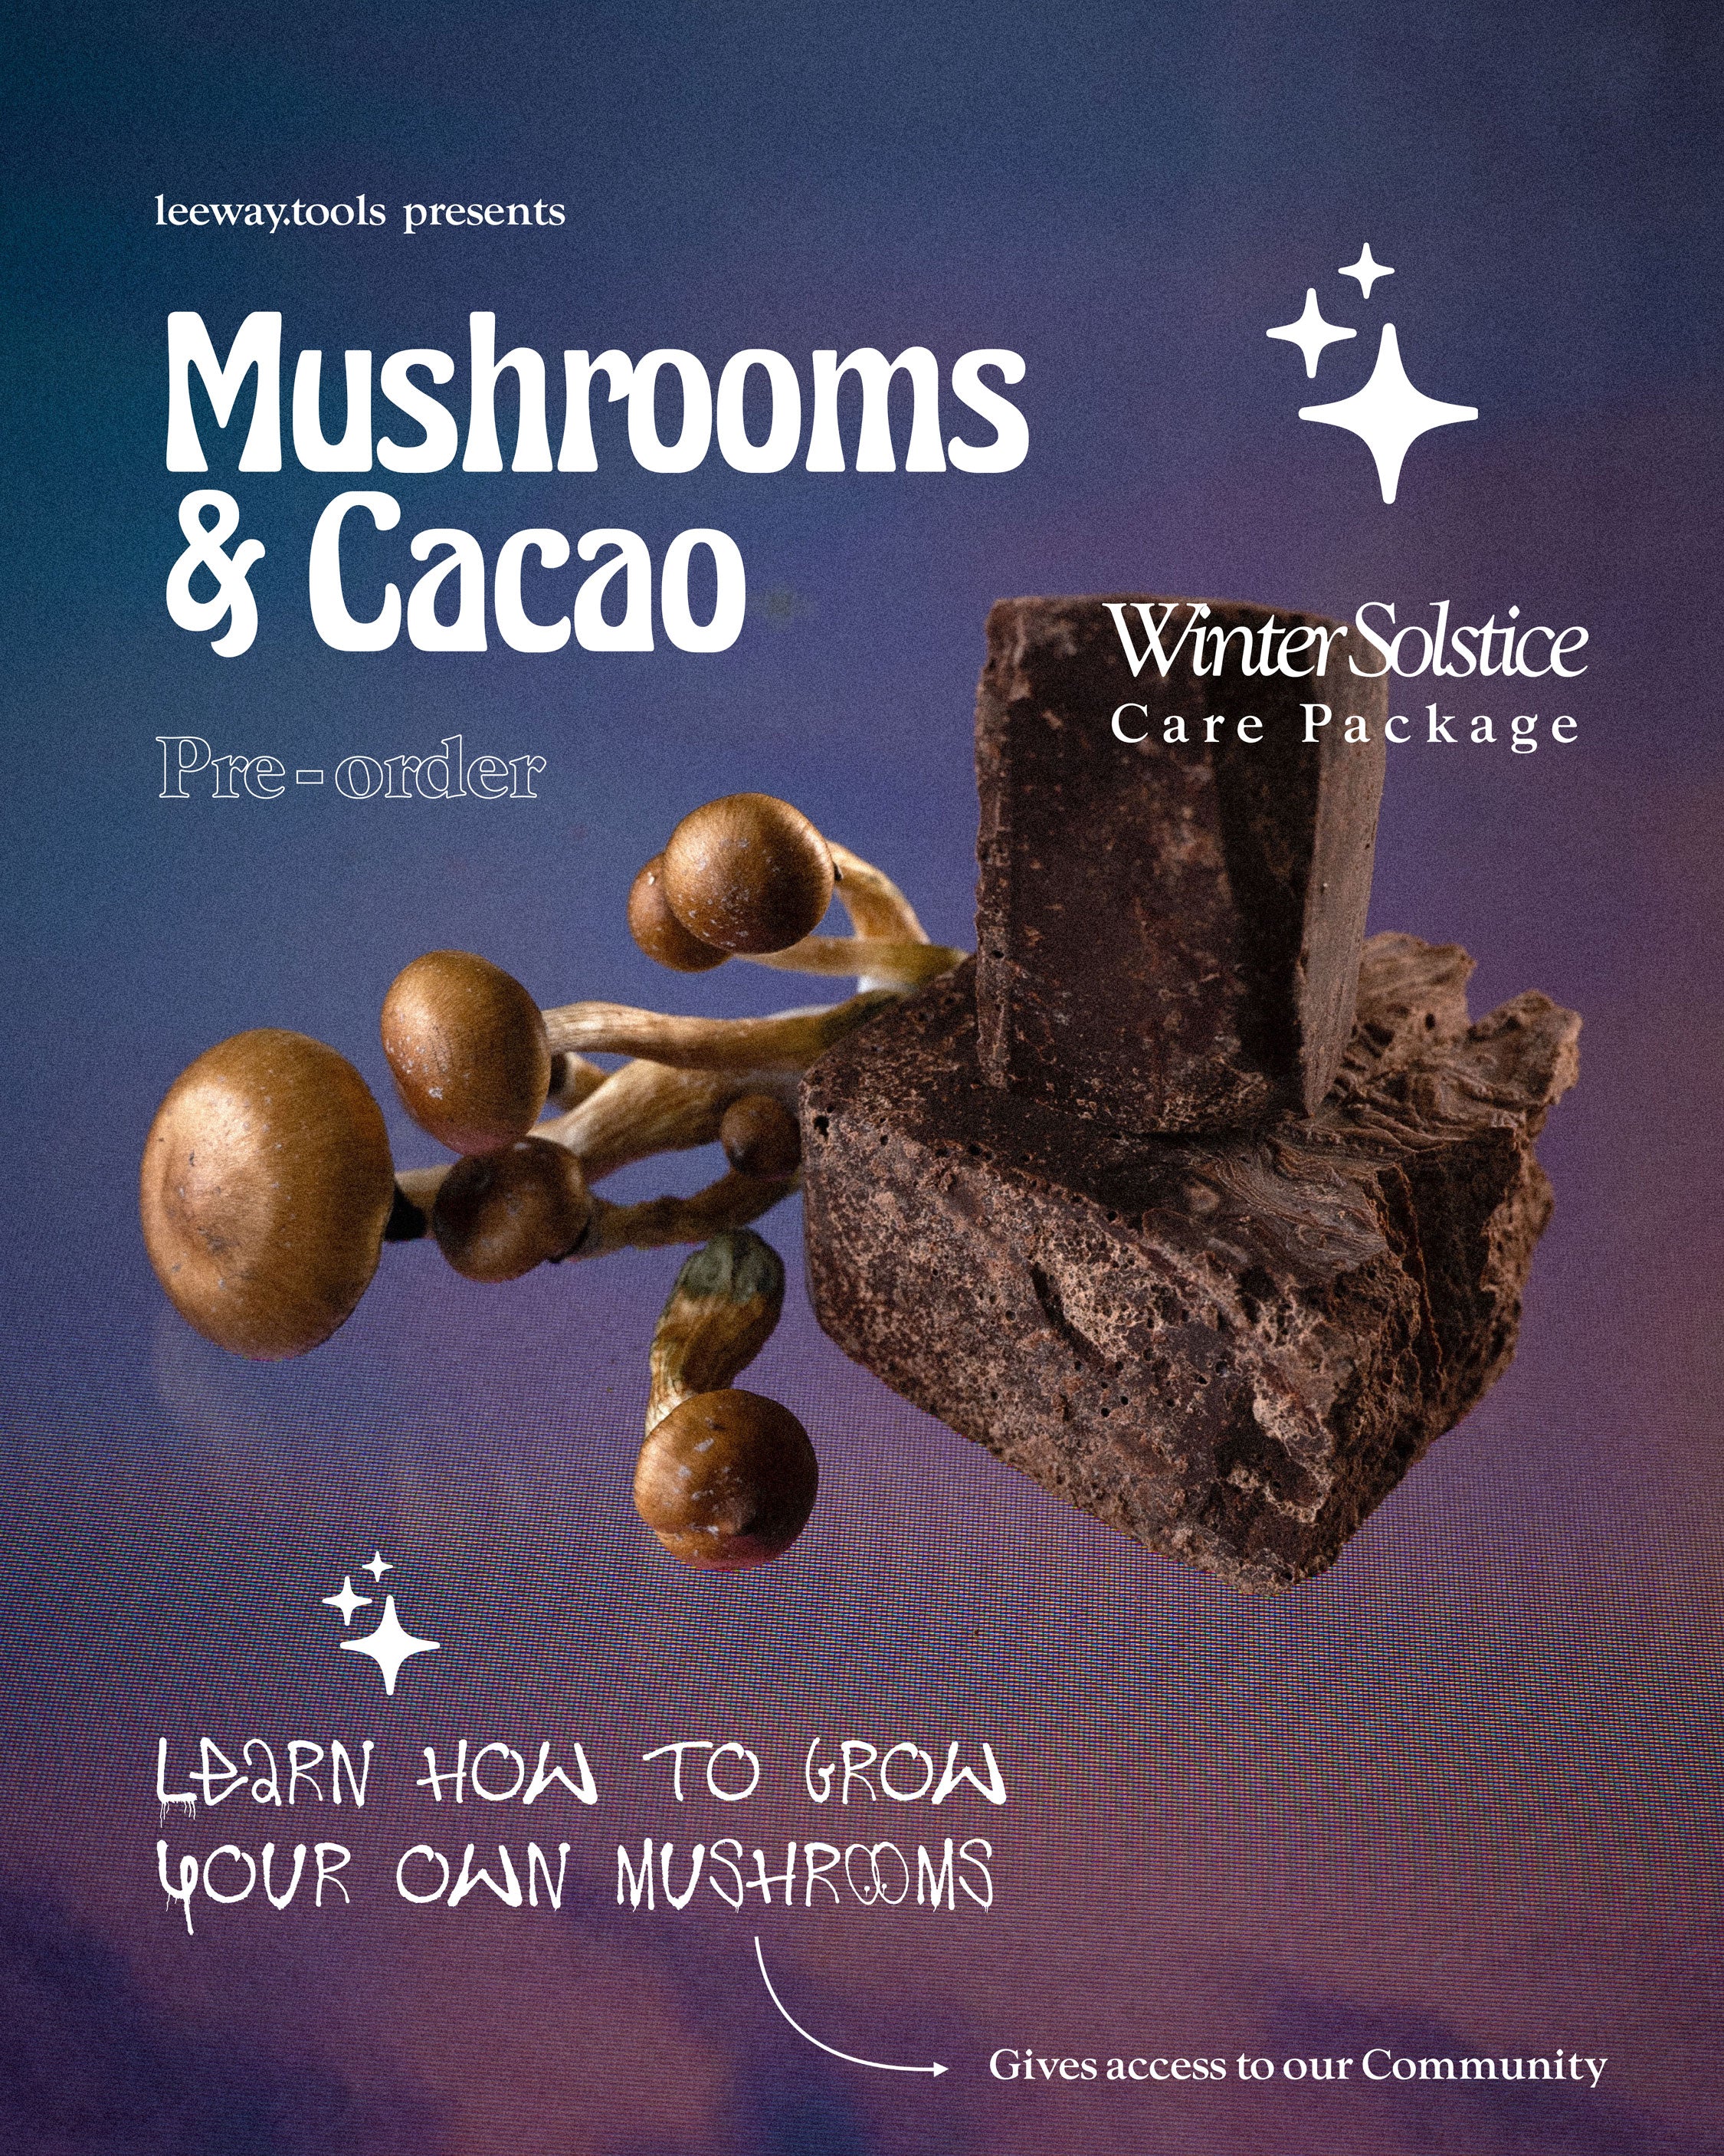 Mushrooms and Cacao [PRE-ORDER]